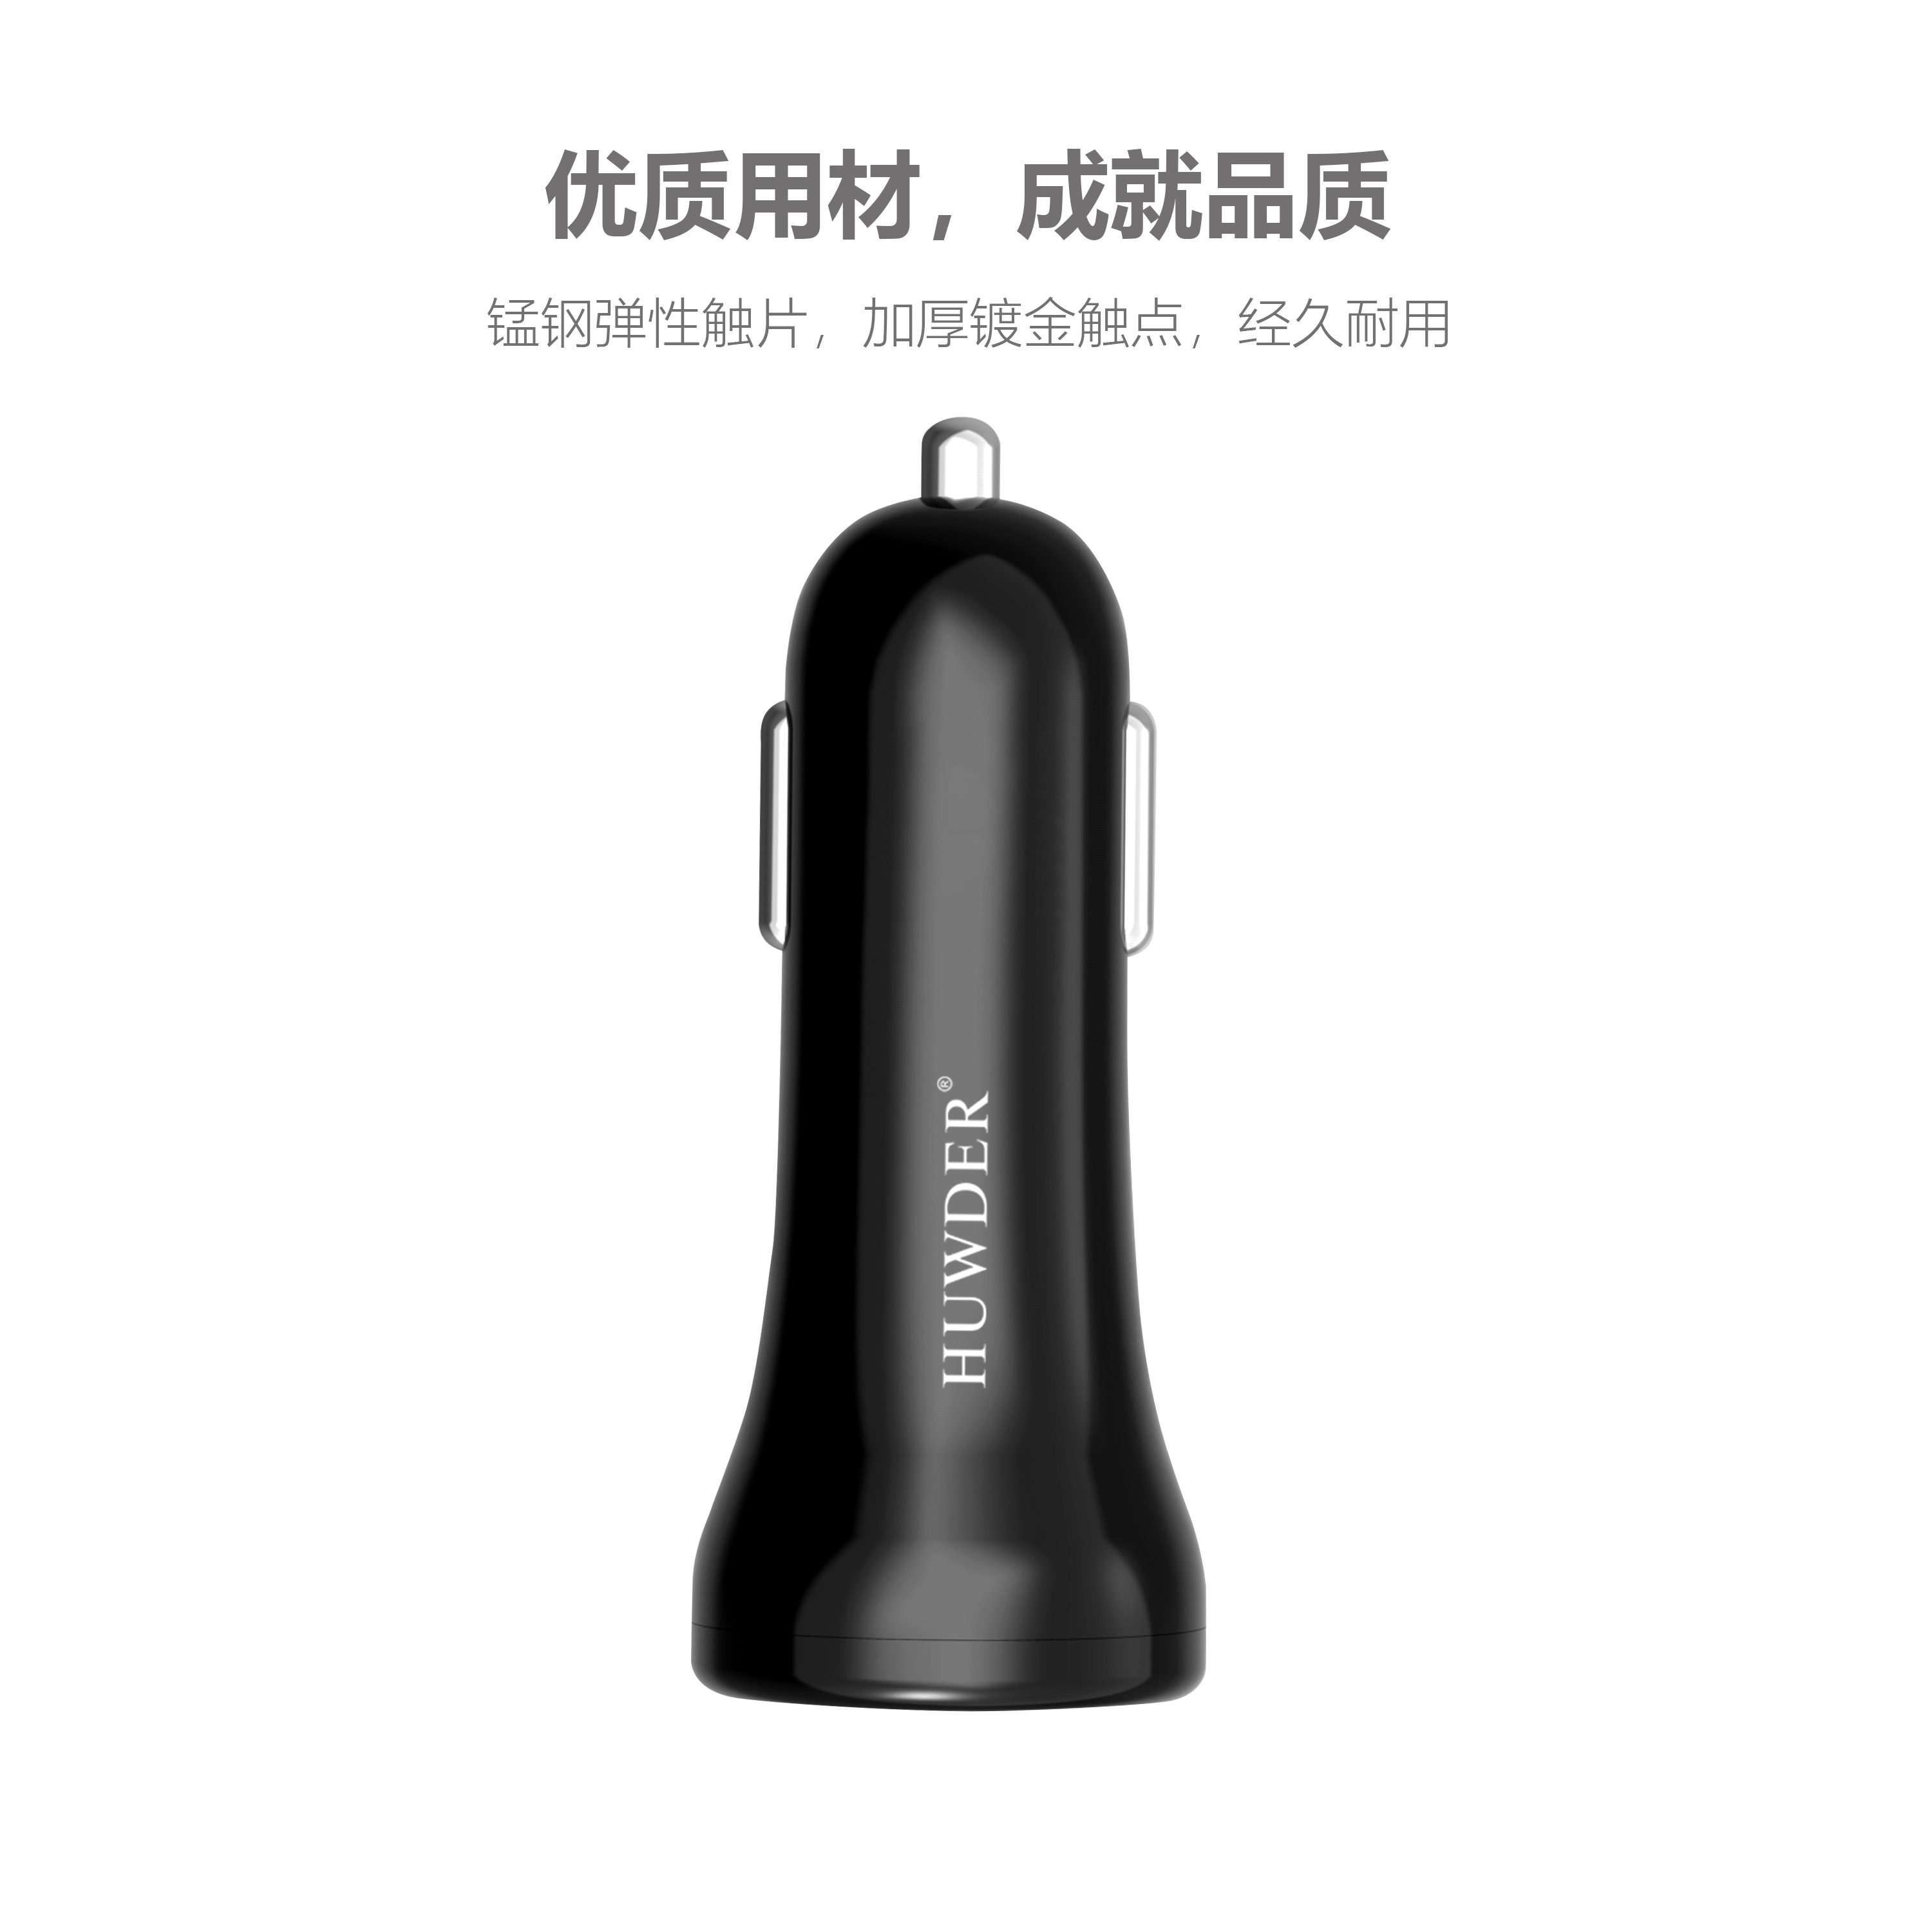 2 Sub-a Car Charger -HDD11-0224